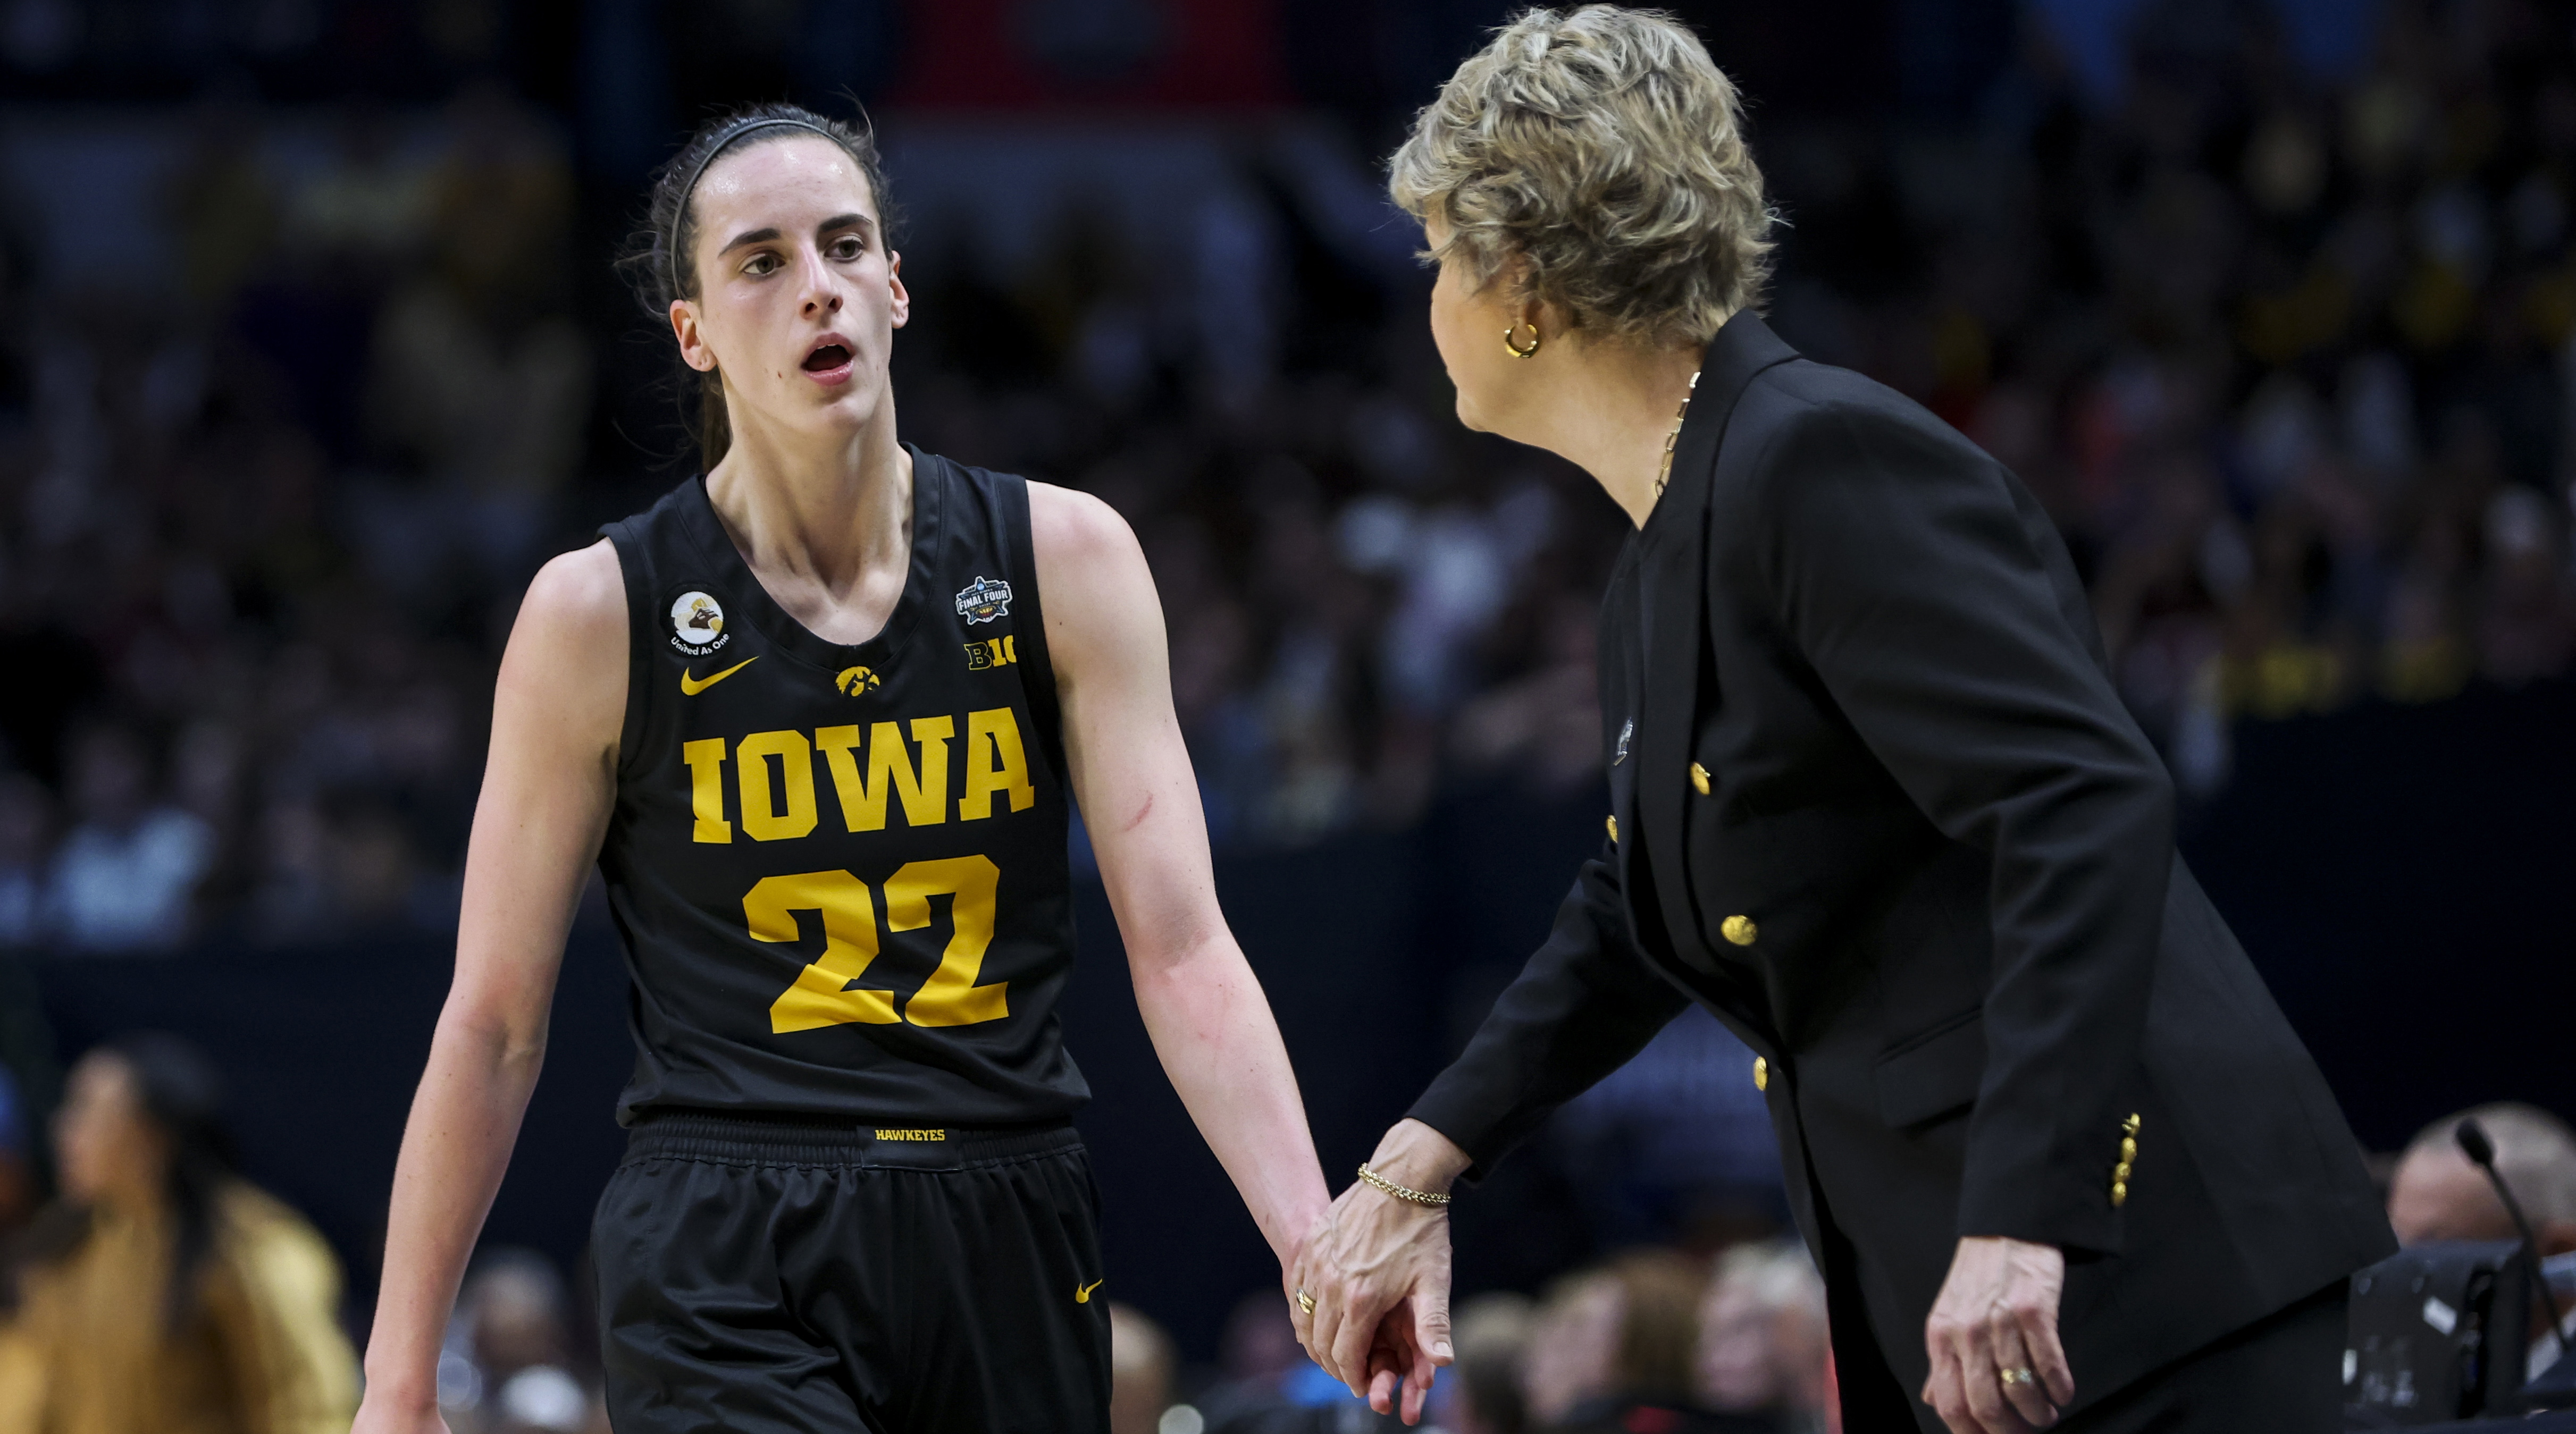 Iowa guard Caitlin Clark low-fives head coach Lisa Bluder during the Hawkeyes’ Final Four matchup against South Carolina.